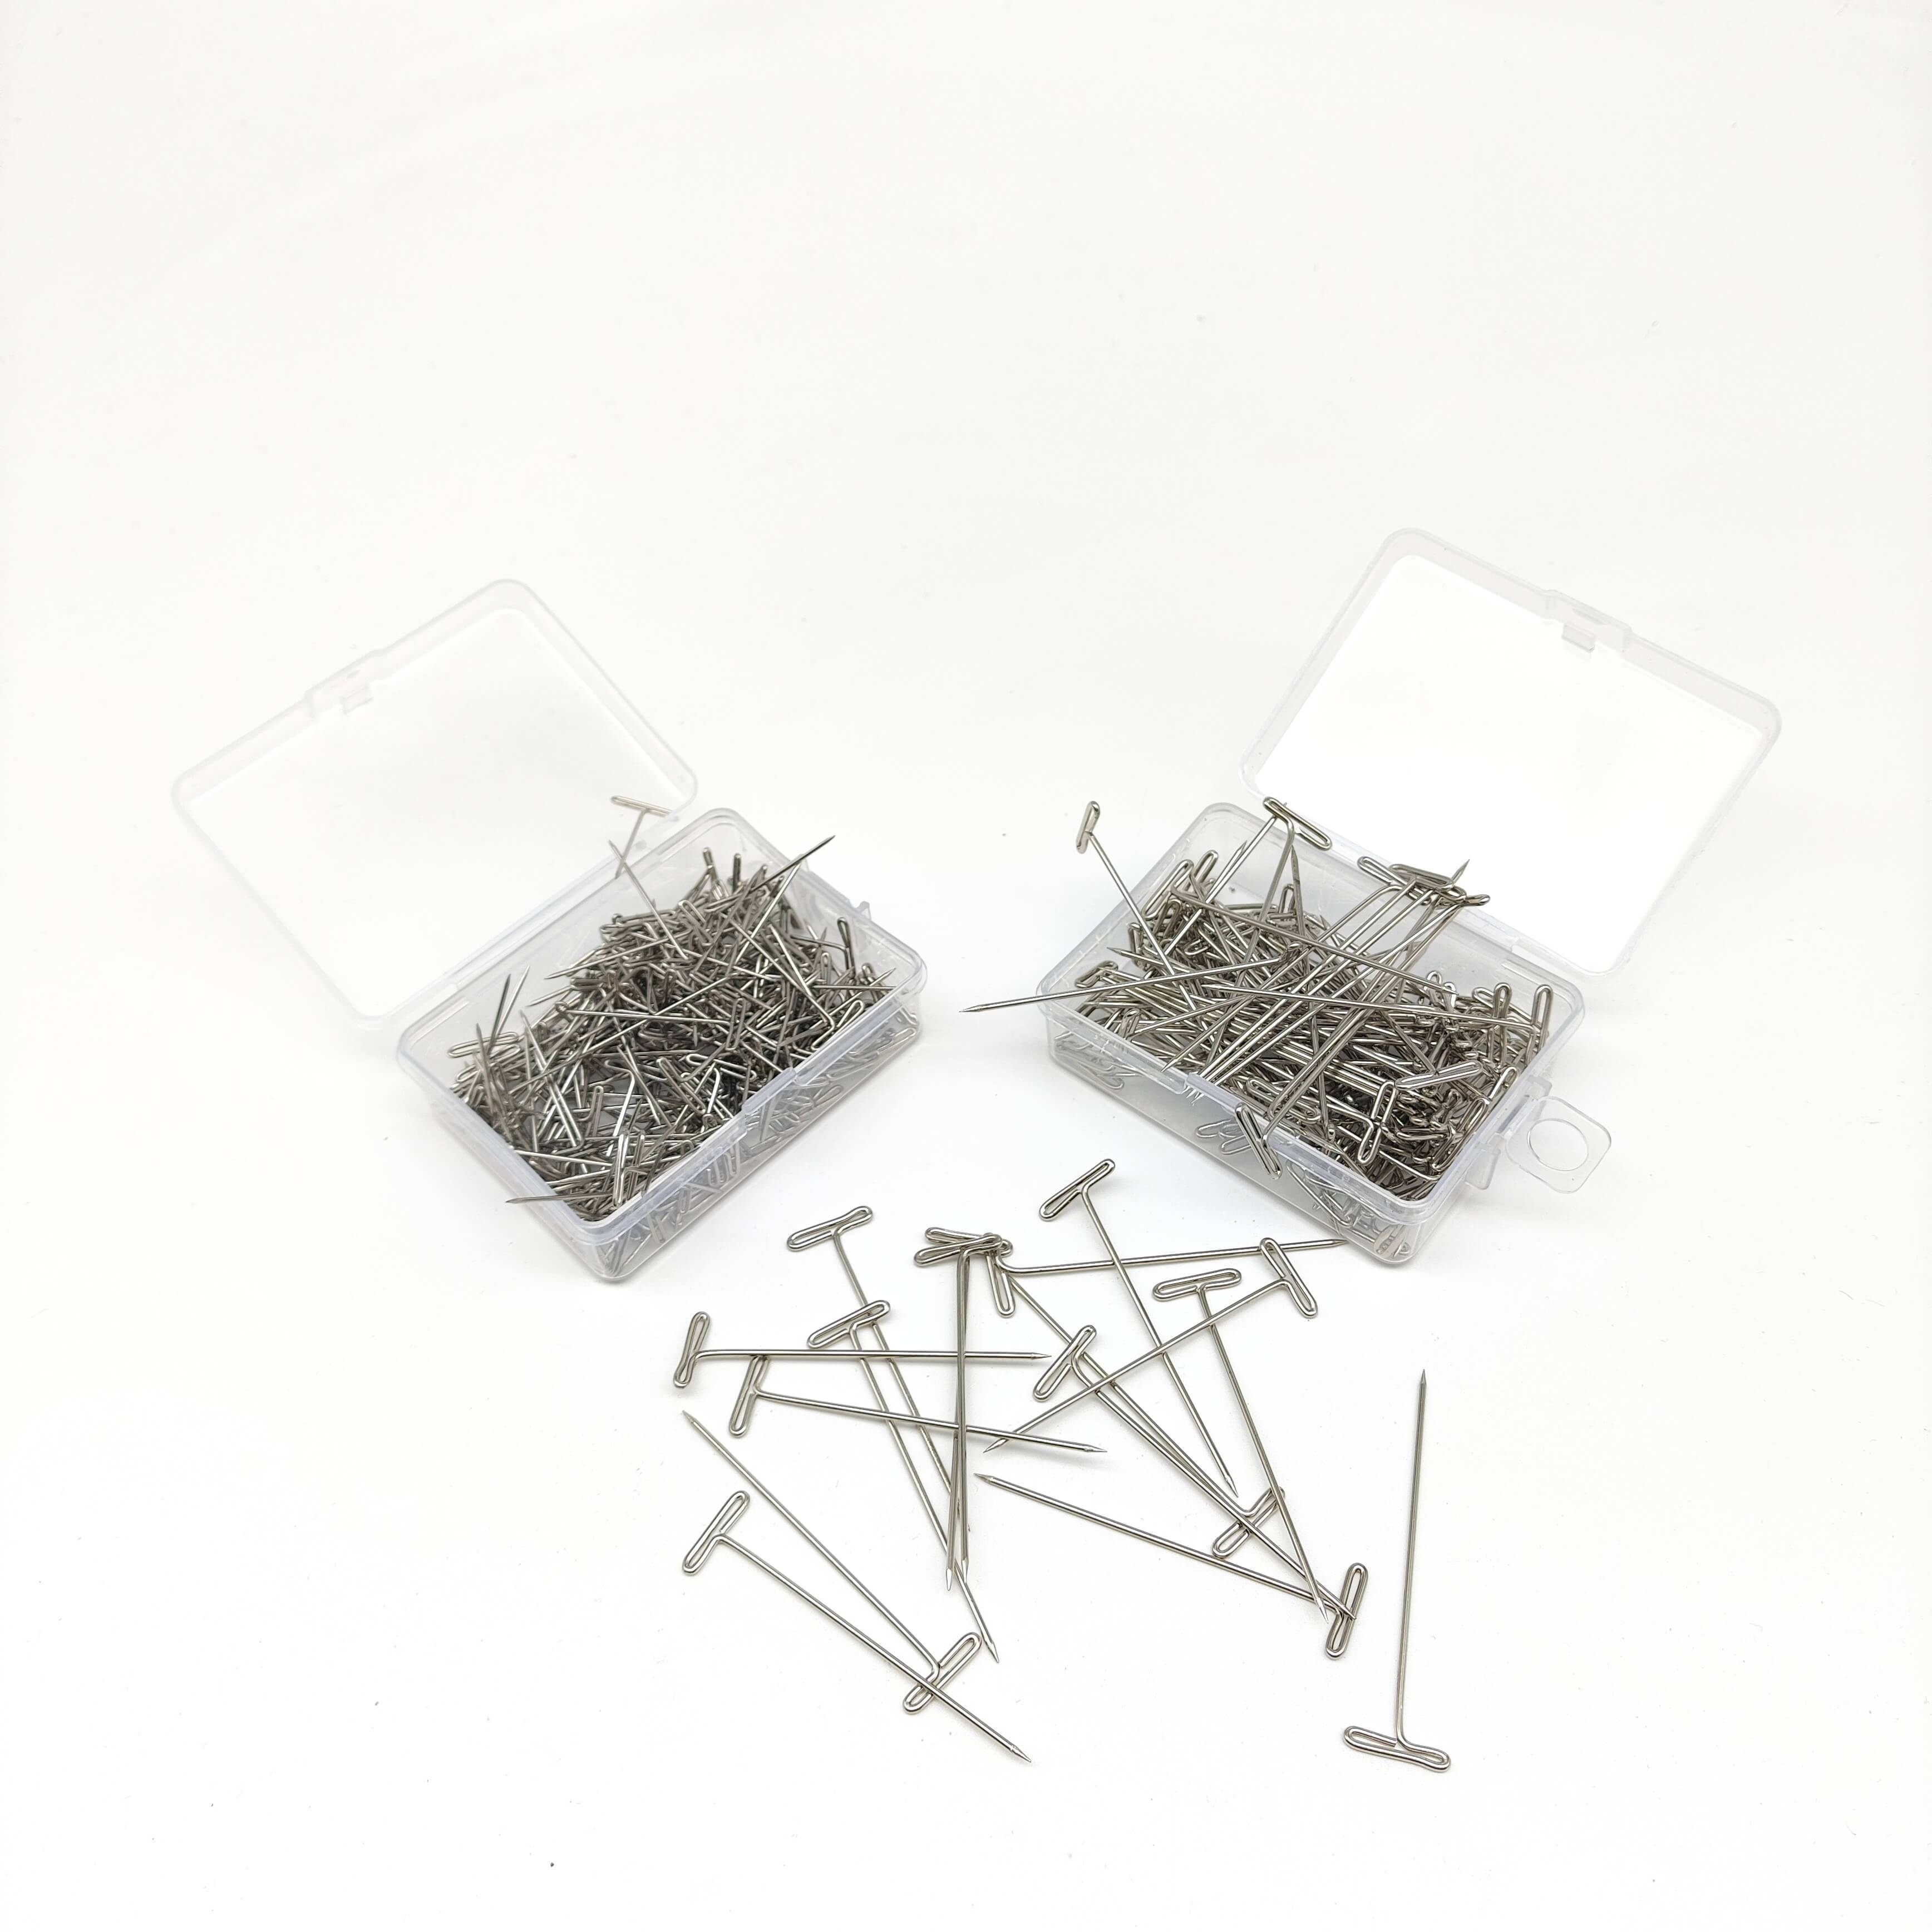 50/100pcs Long T pins Silver Wig Pins for Wigs Making/Display On Mannequin  Canvas Head 38/51mm T pins needle Salon Styling Tools